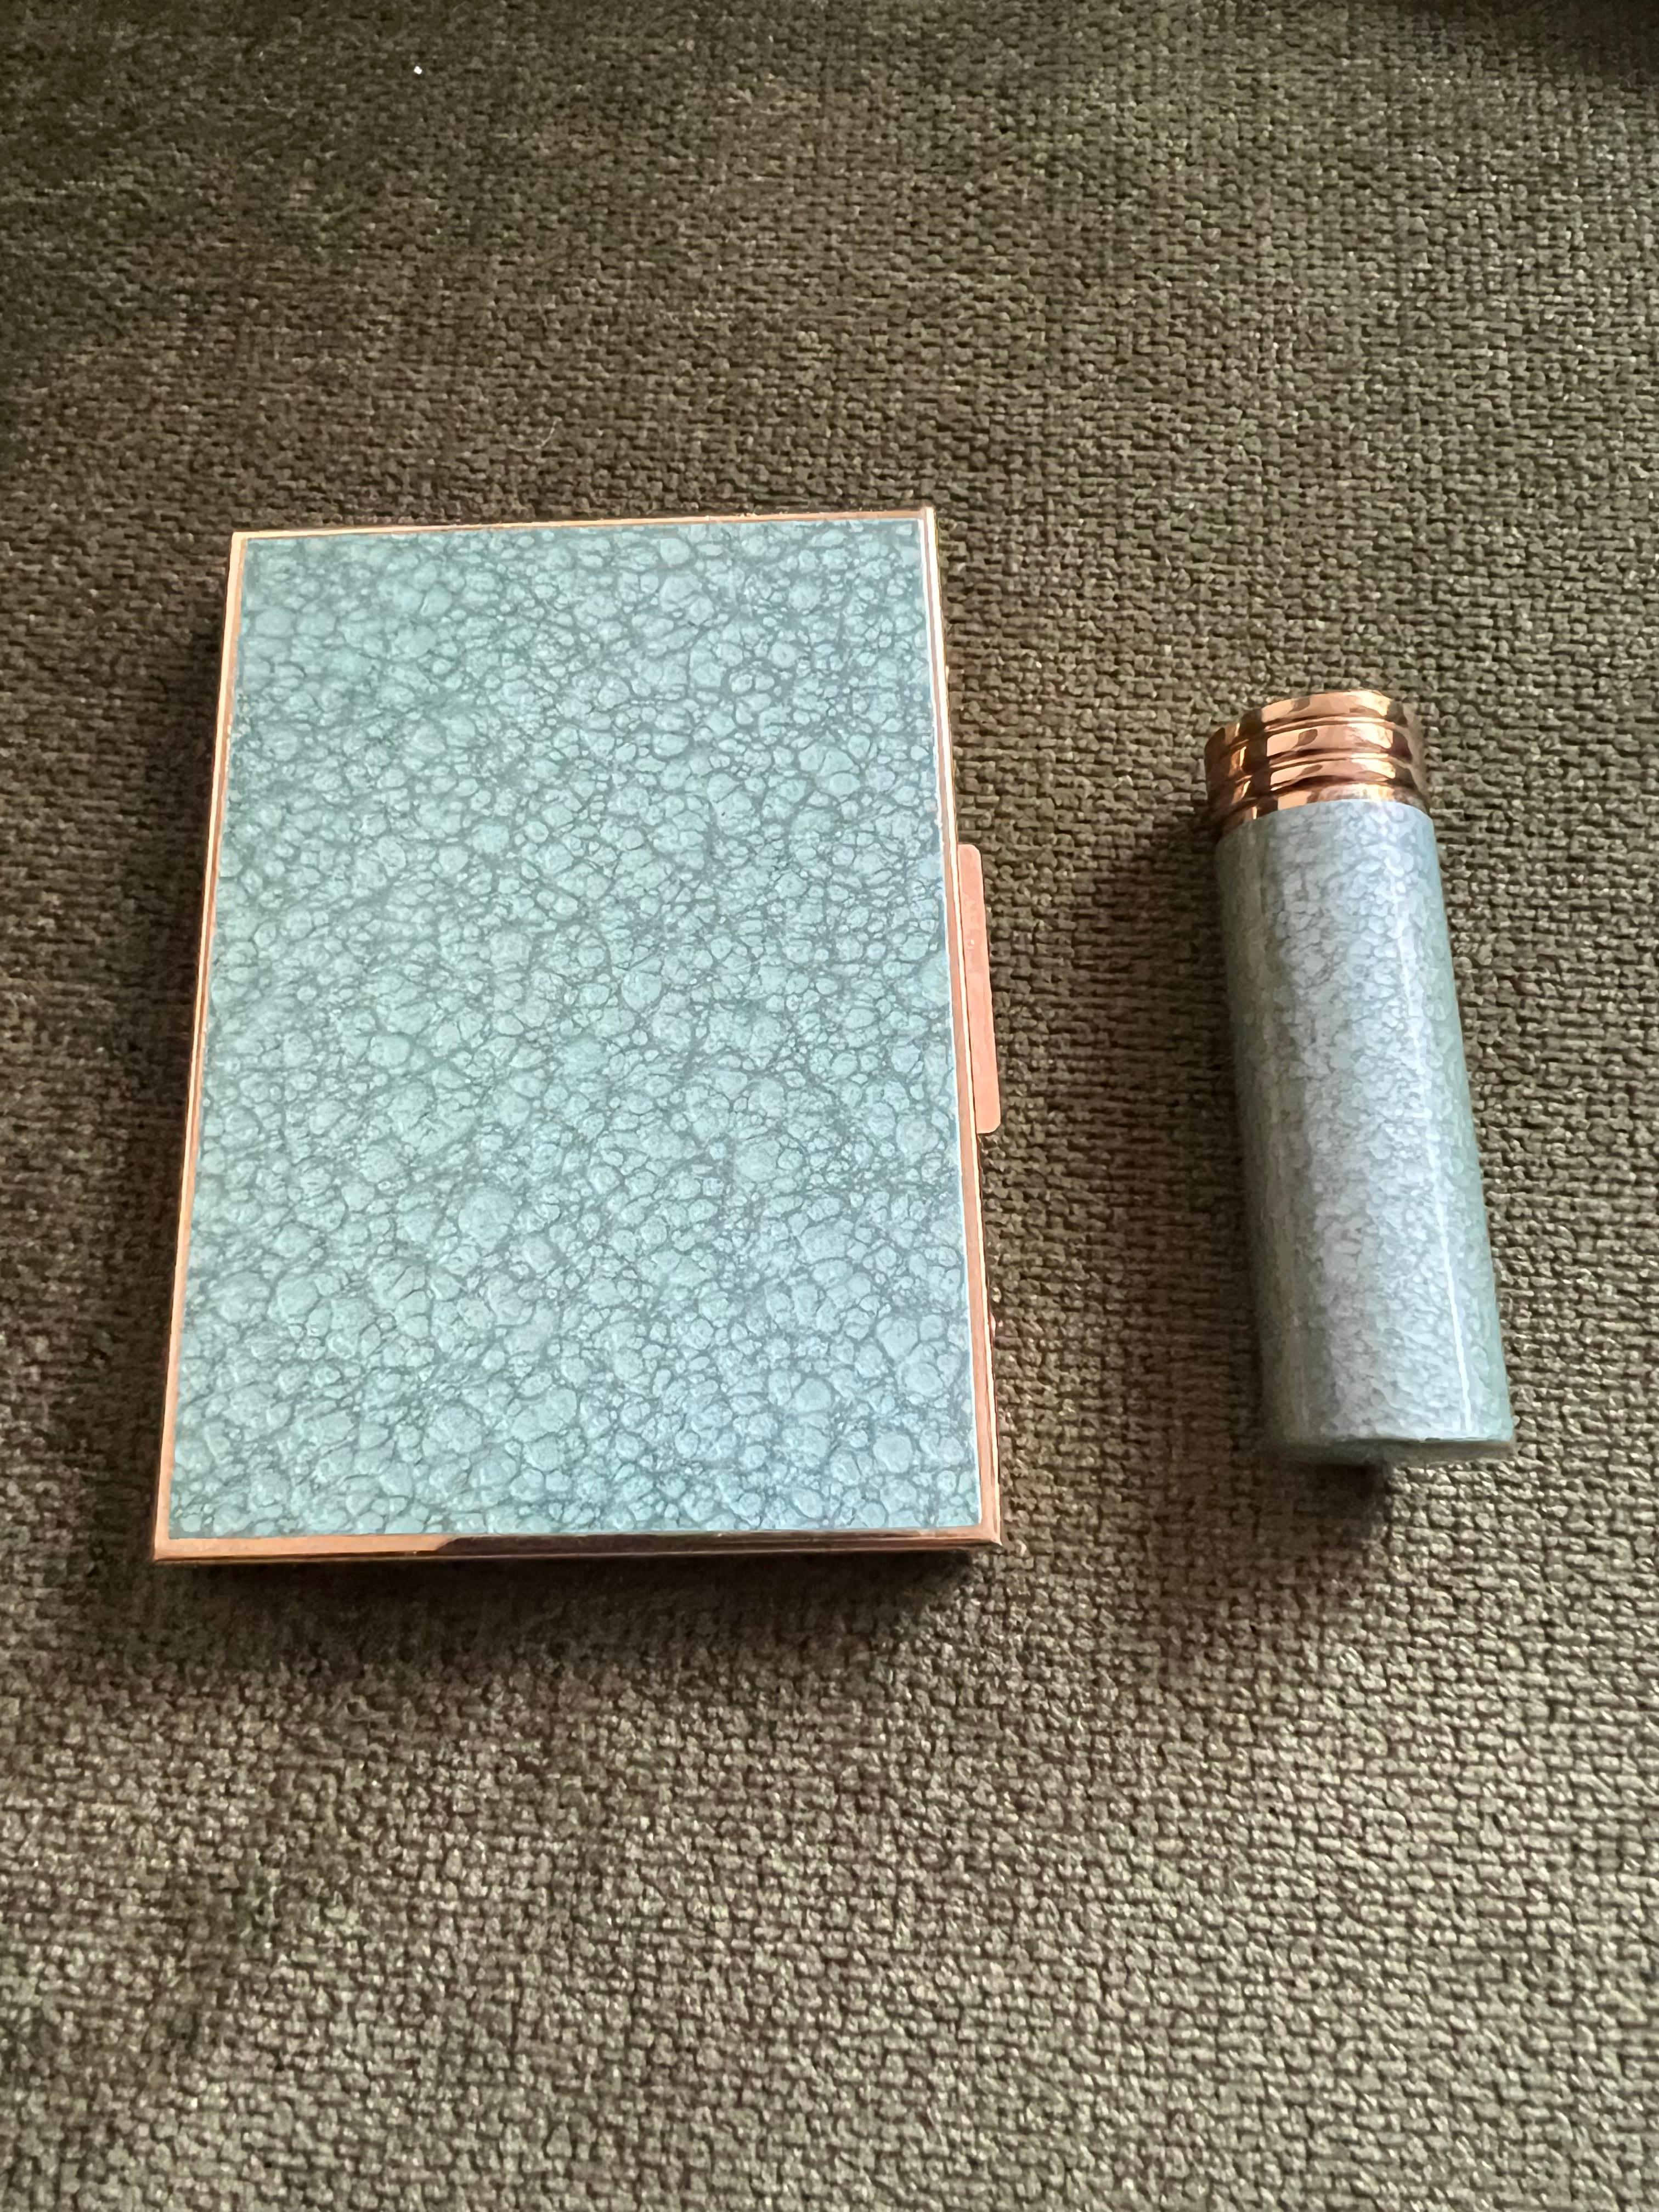 Ronson Enameled Cigarette Case & Lipstick Set
Circa 1960s
There is a place for a lighter as well, but the original lighter is missing. 
The lipstick case and the cigarette case are in fantastic condition considering they are from the 60s.
There is a